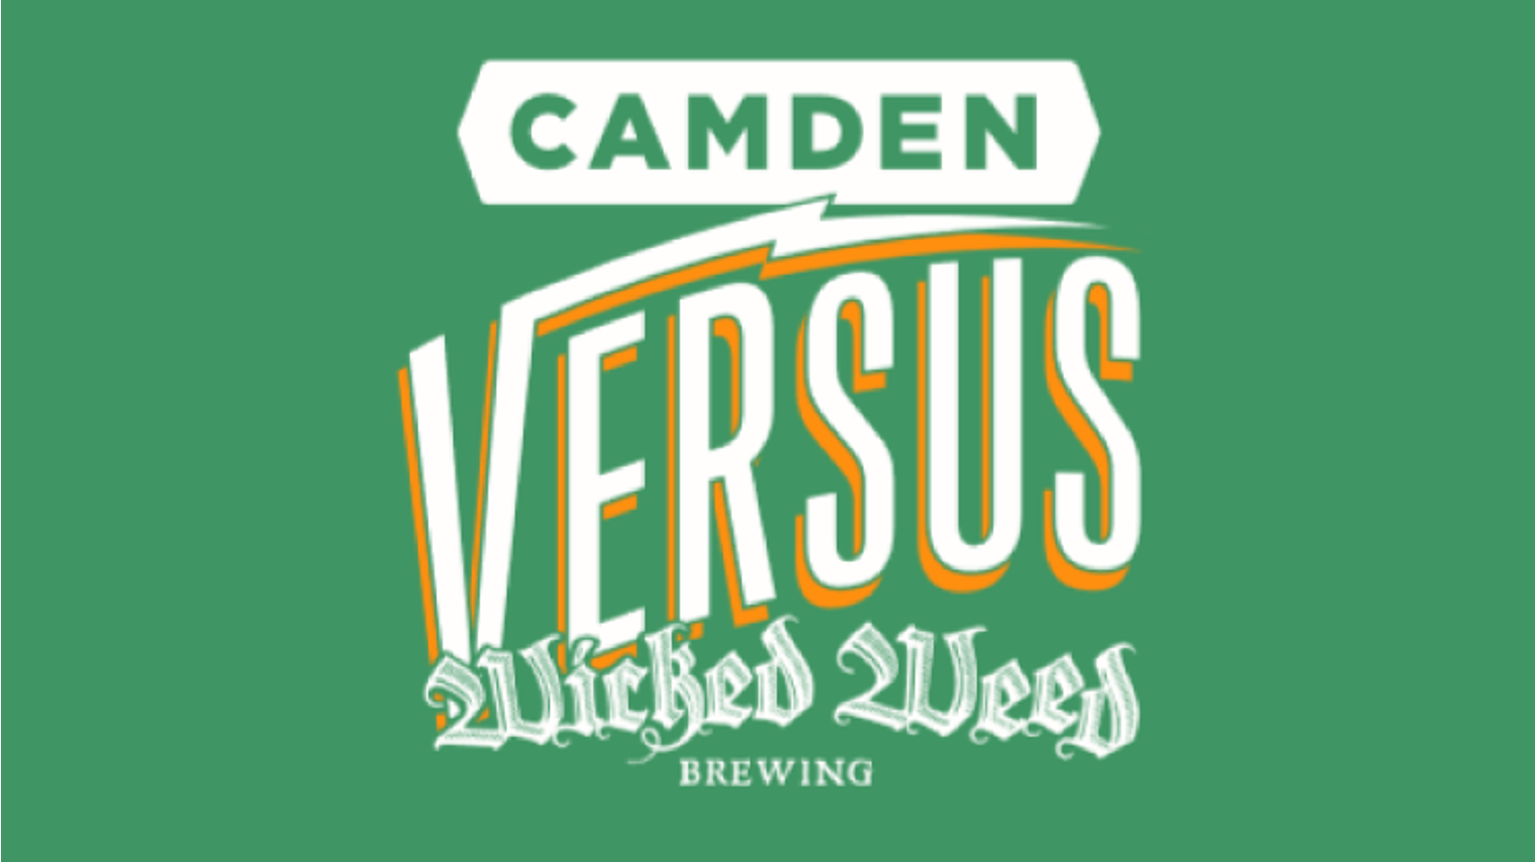 thumbnail for blog article named: Beery Christmas Day 7: Camden & Wicked Weed Versus IPA